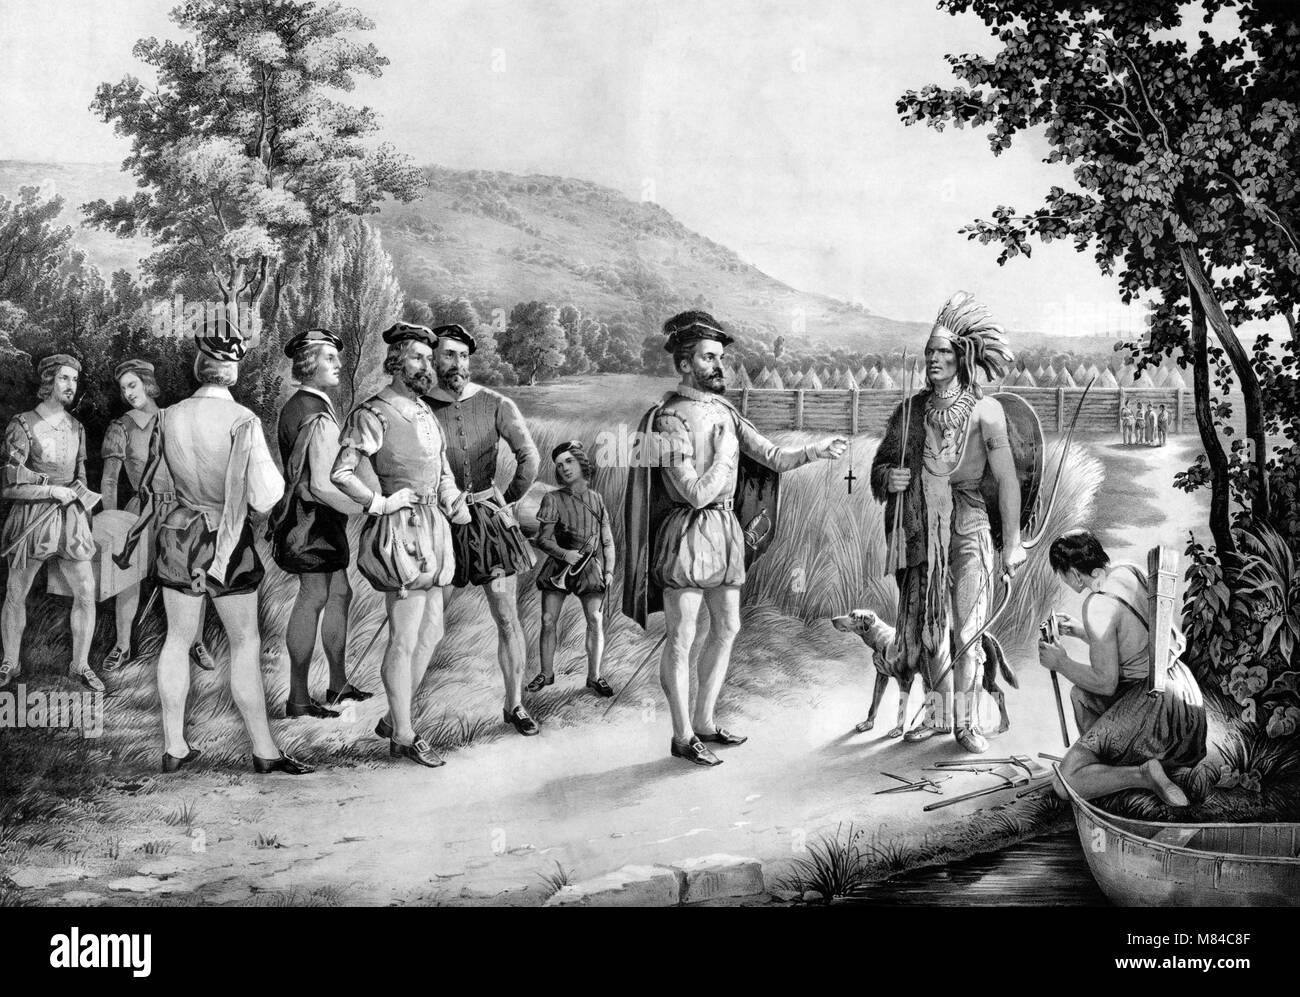 Jacques Cartier (1491-1557). A 19th century lithograph of the French explorer Jacques Cartier meeting Indians at Hochelaga, now Montreal, in 1535. Stock Photo